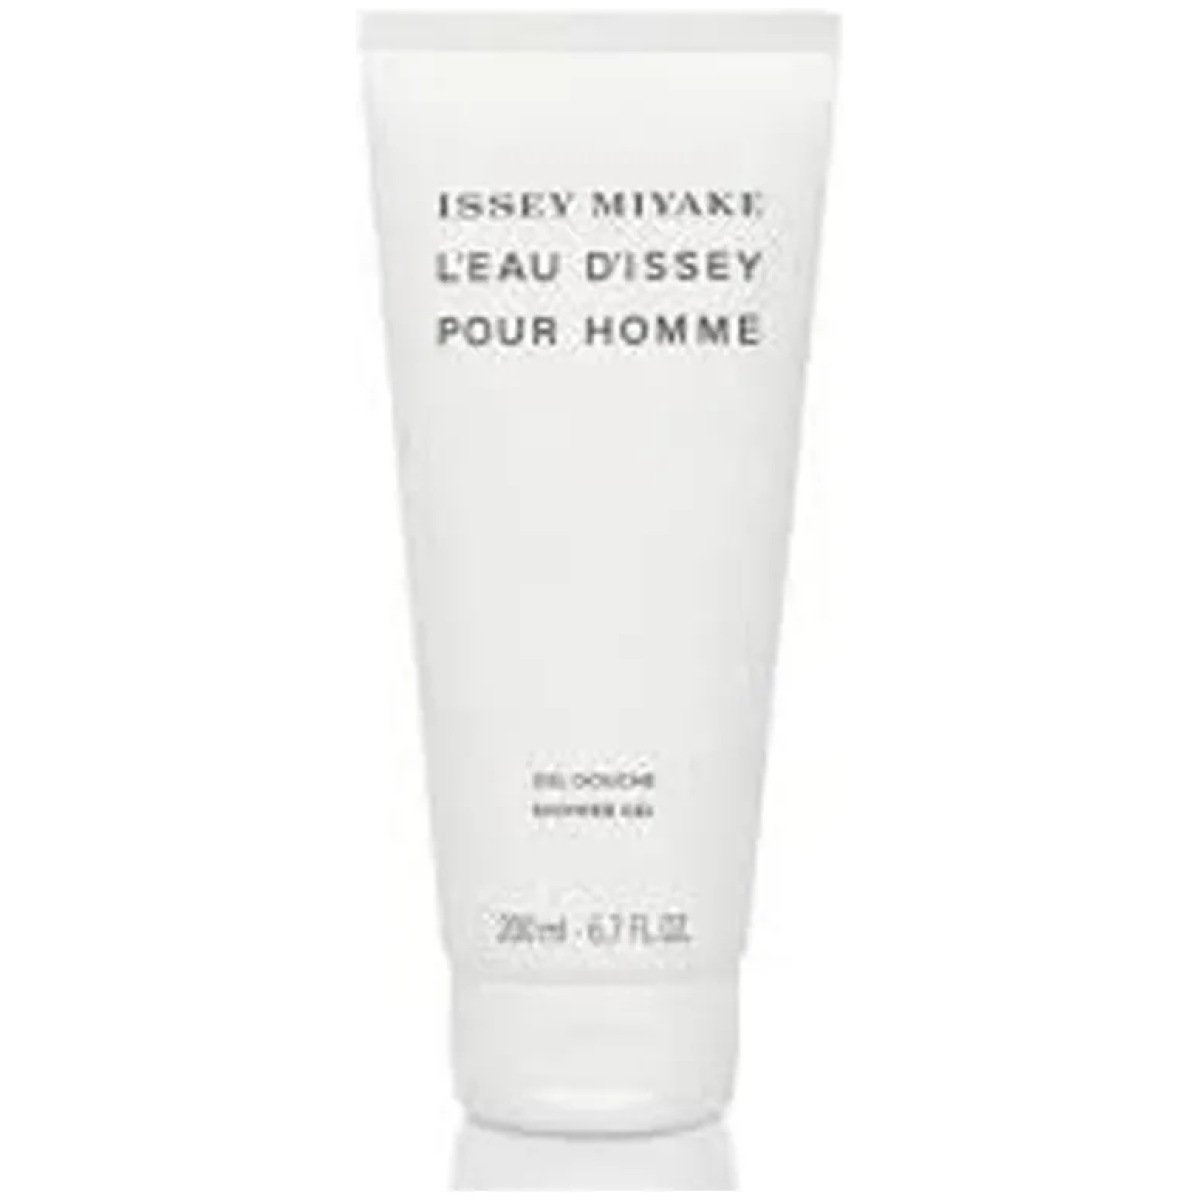 Issey Miyake L'eau D'issey Pour Homme Shower Gel 200ml